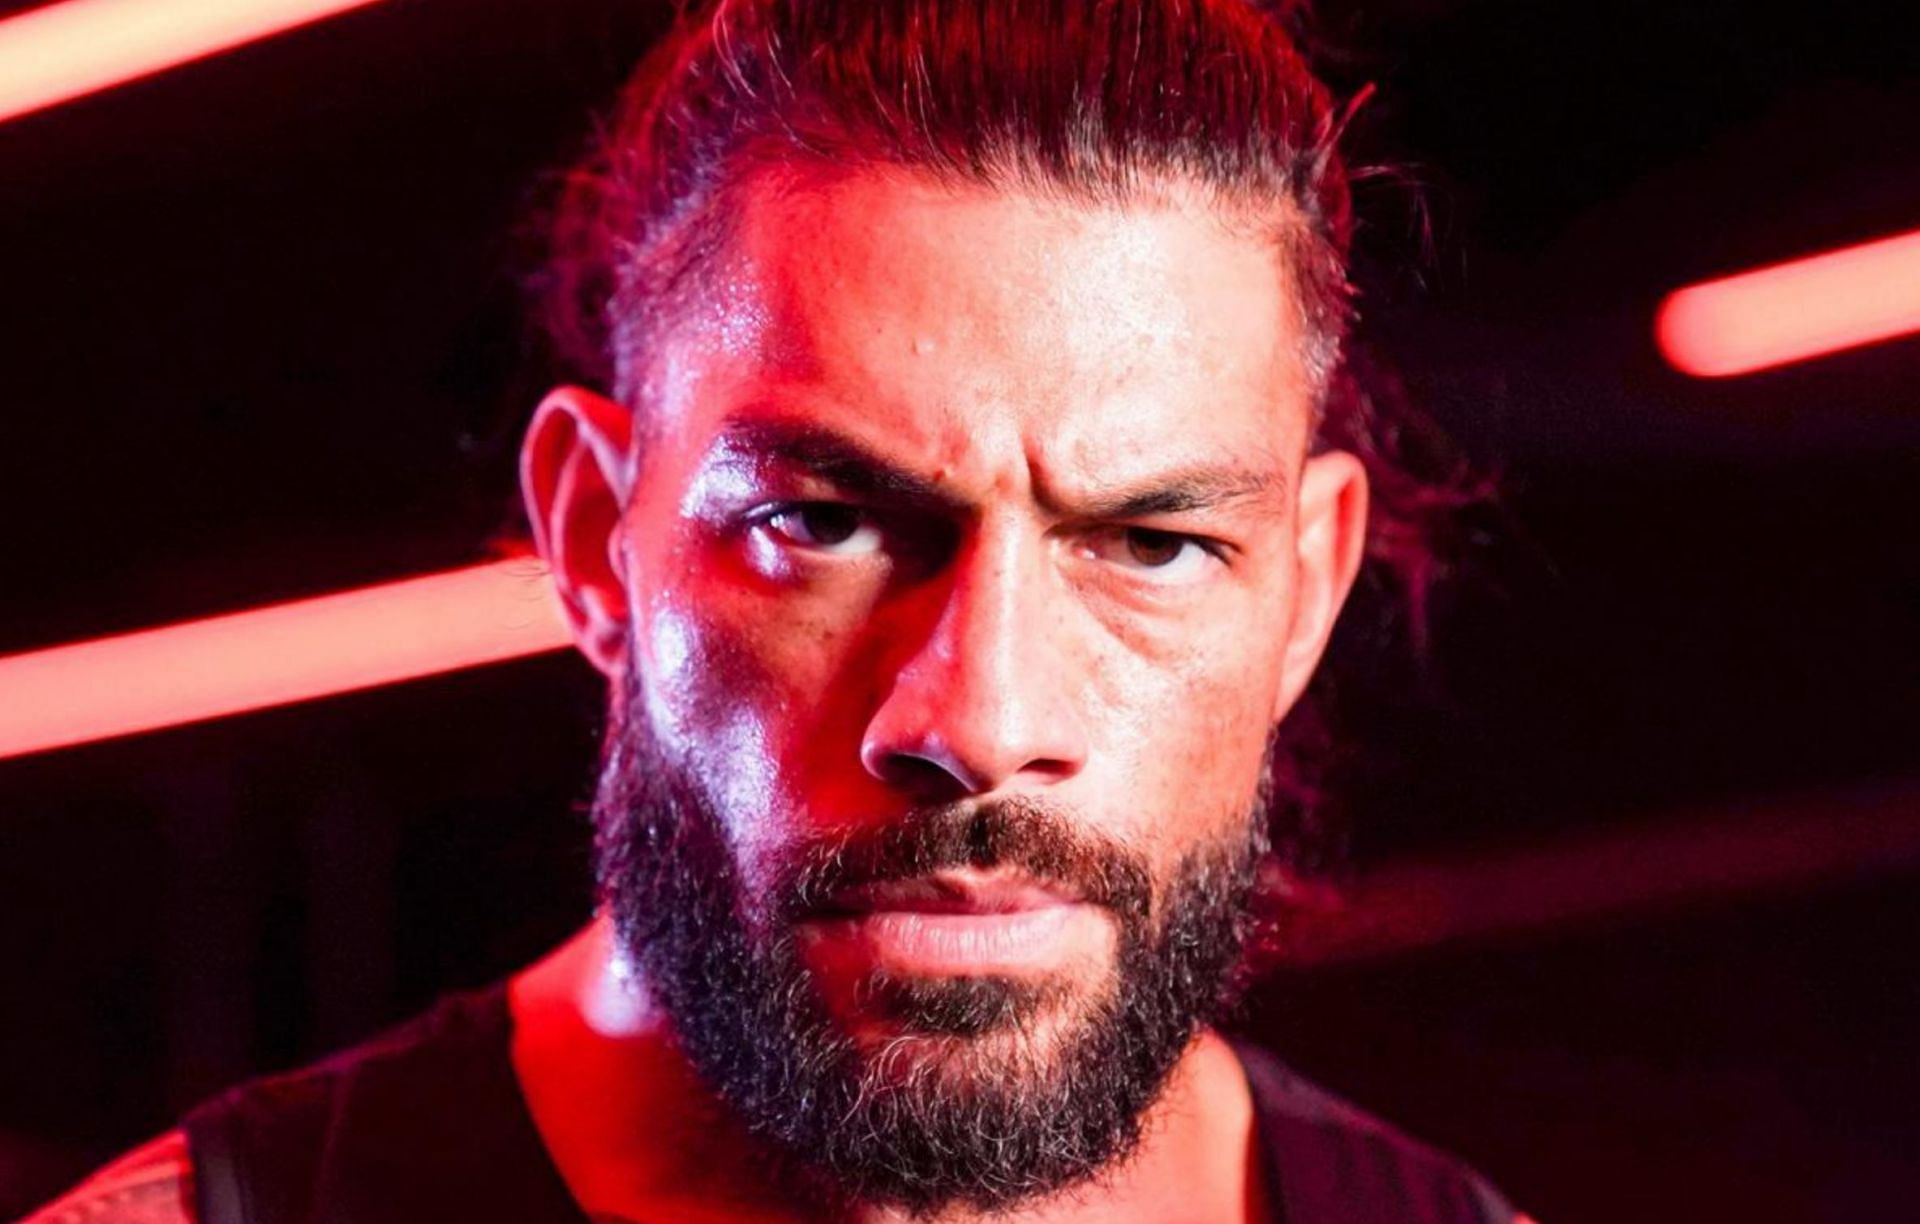 Reigns is the current Undisputed WWE Universal Champion